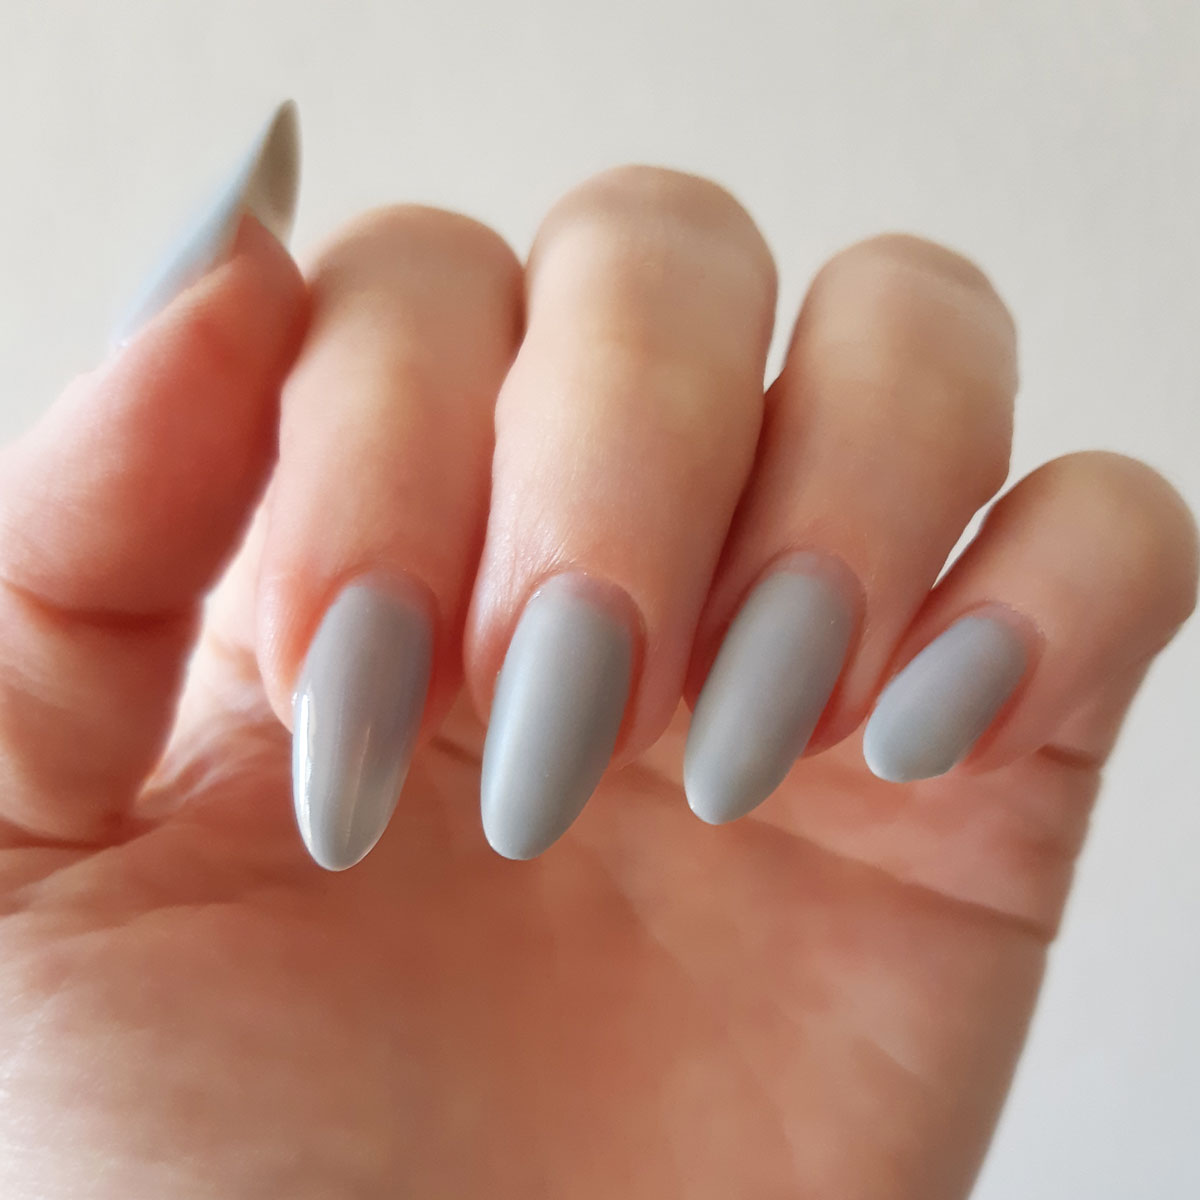 zoom in almond nails light grey gel colour with matte top coat on 2 middle nails and glossy top coat on the others for a very chic effect on your nails Shop the shade Winter Chic Gel Polish by Nail Art Bay Australia Gel polish Colours for nail art and nails at home